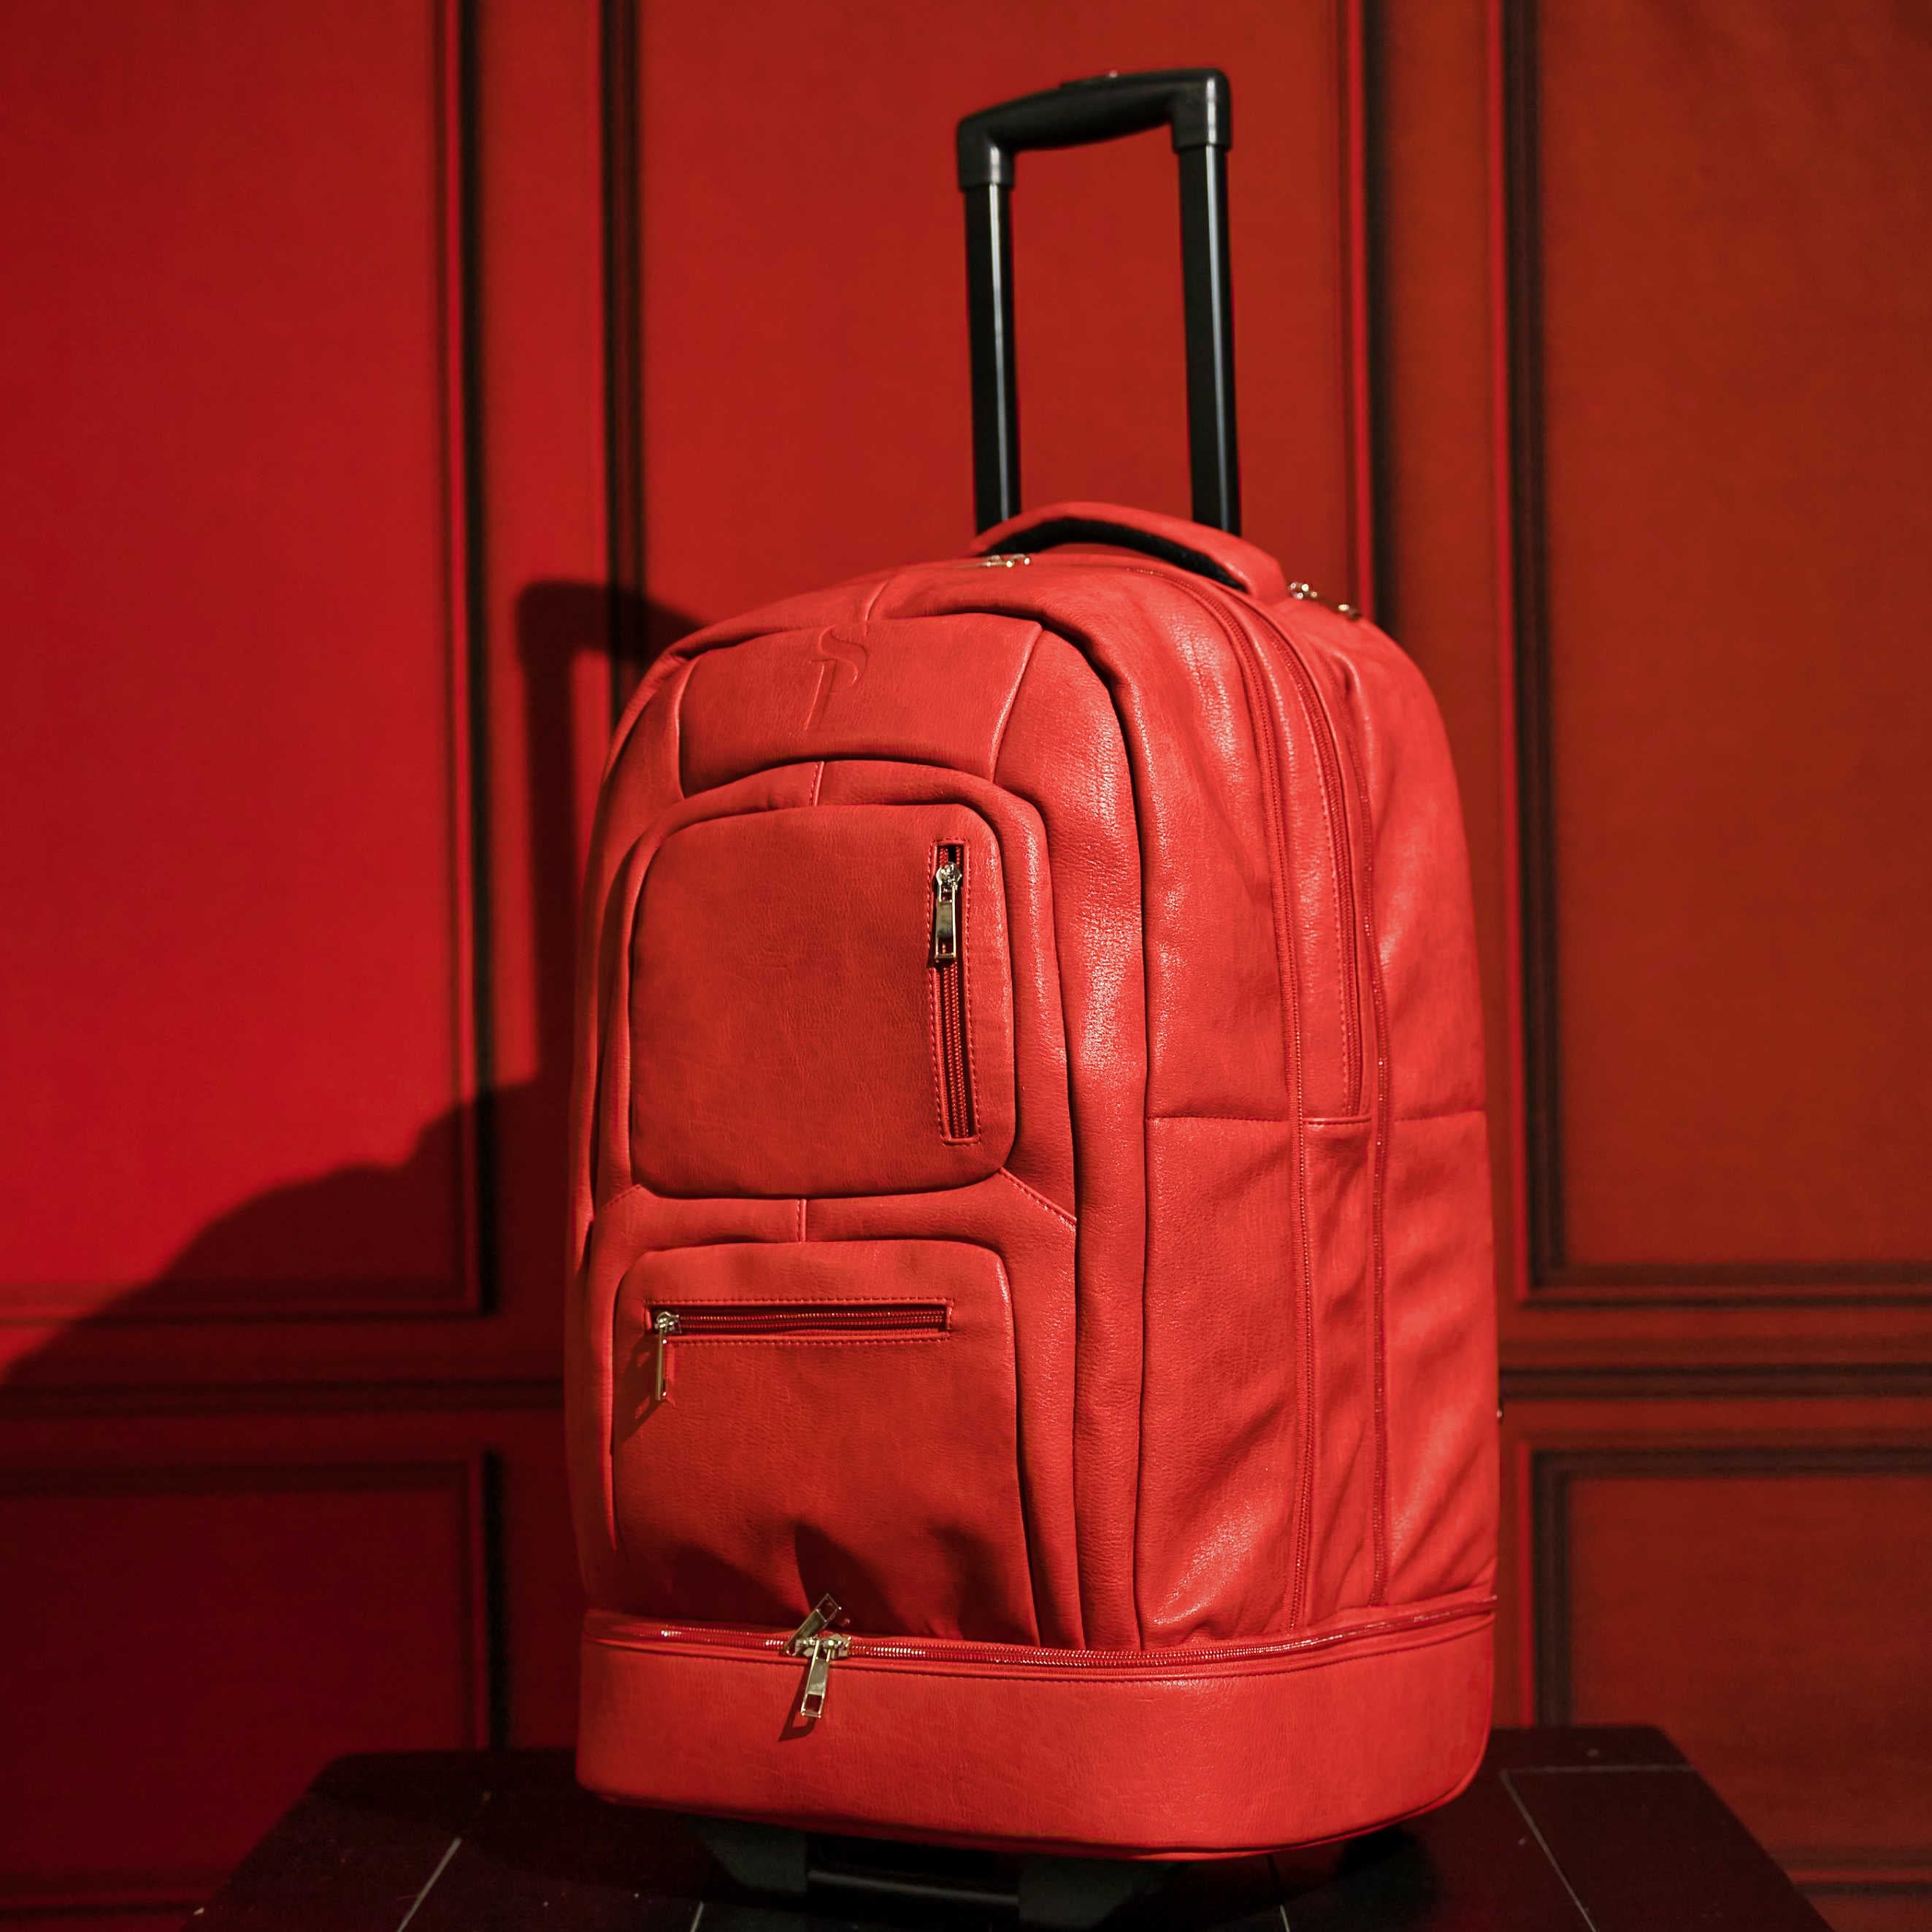 Red Tumbled Leather Roller Bag (Only 100 Made) - Sole Premise